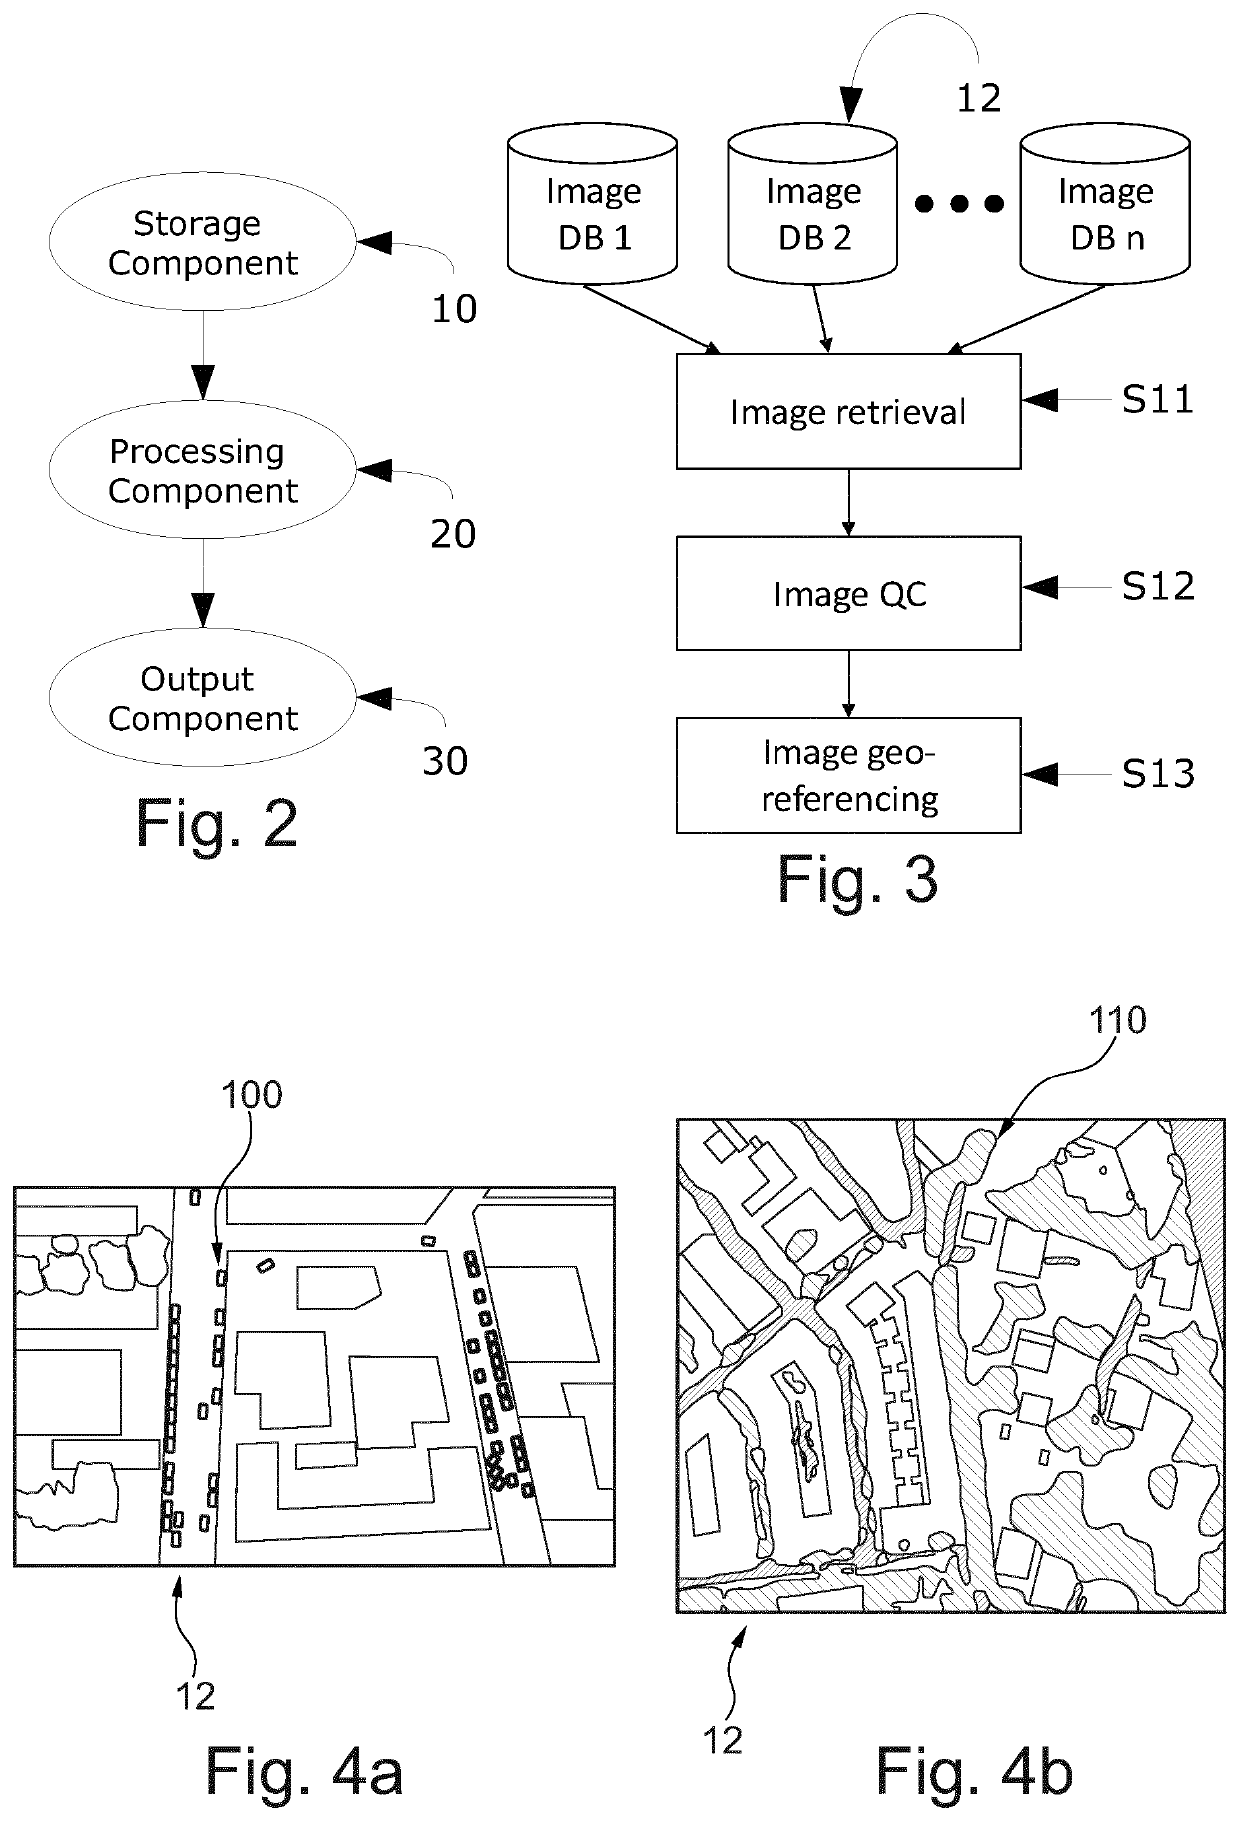 System and method for identifying parking spaces and parking occupancy based on satellite and/or aerial images